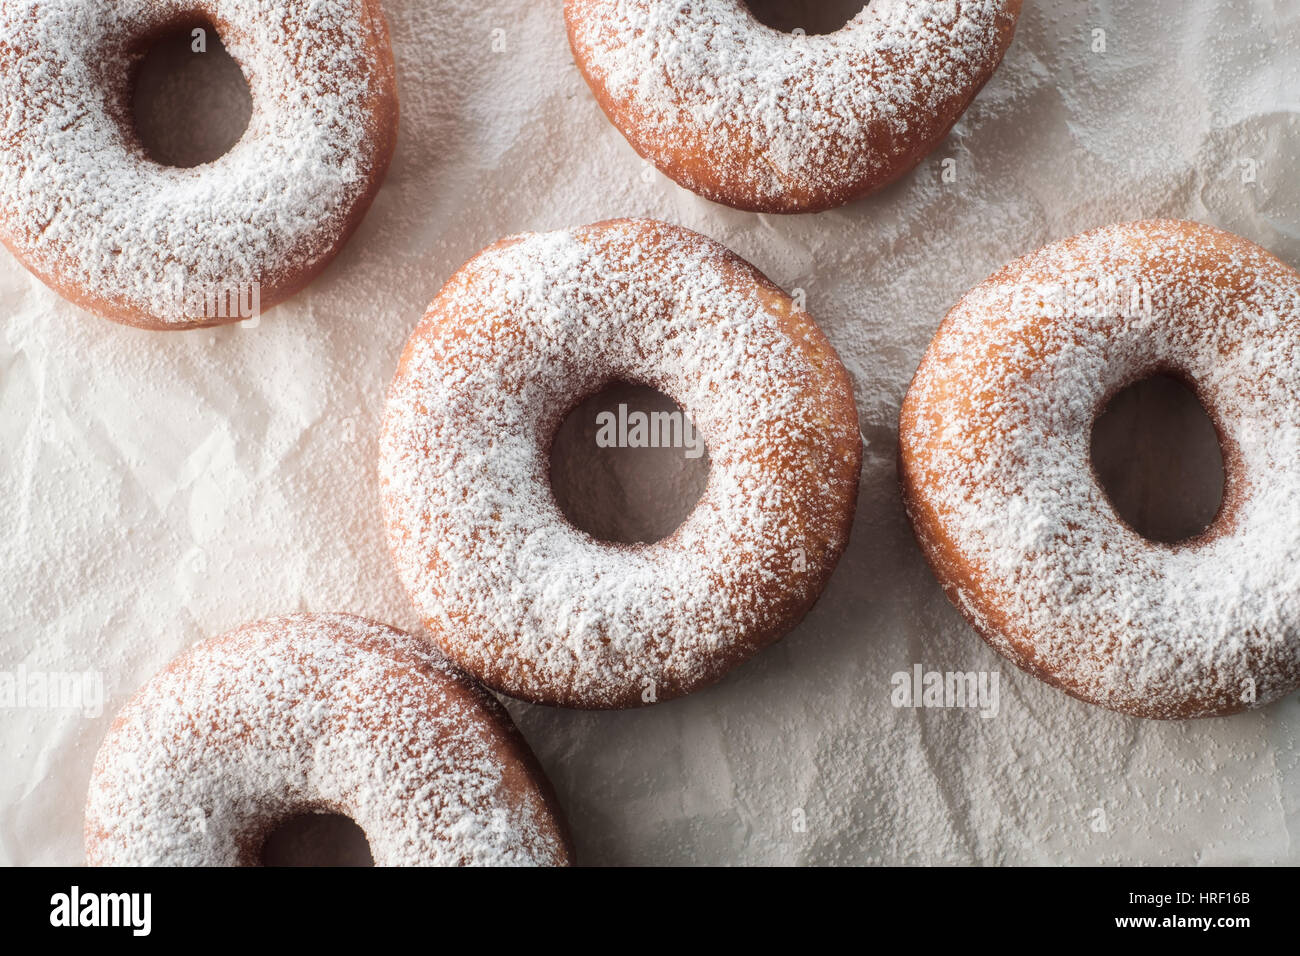 Powdered Sugar donuts on white paper Stock Photo